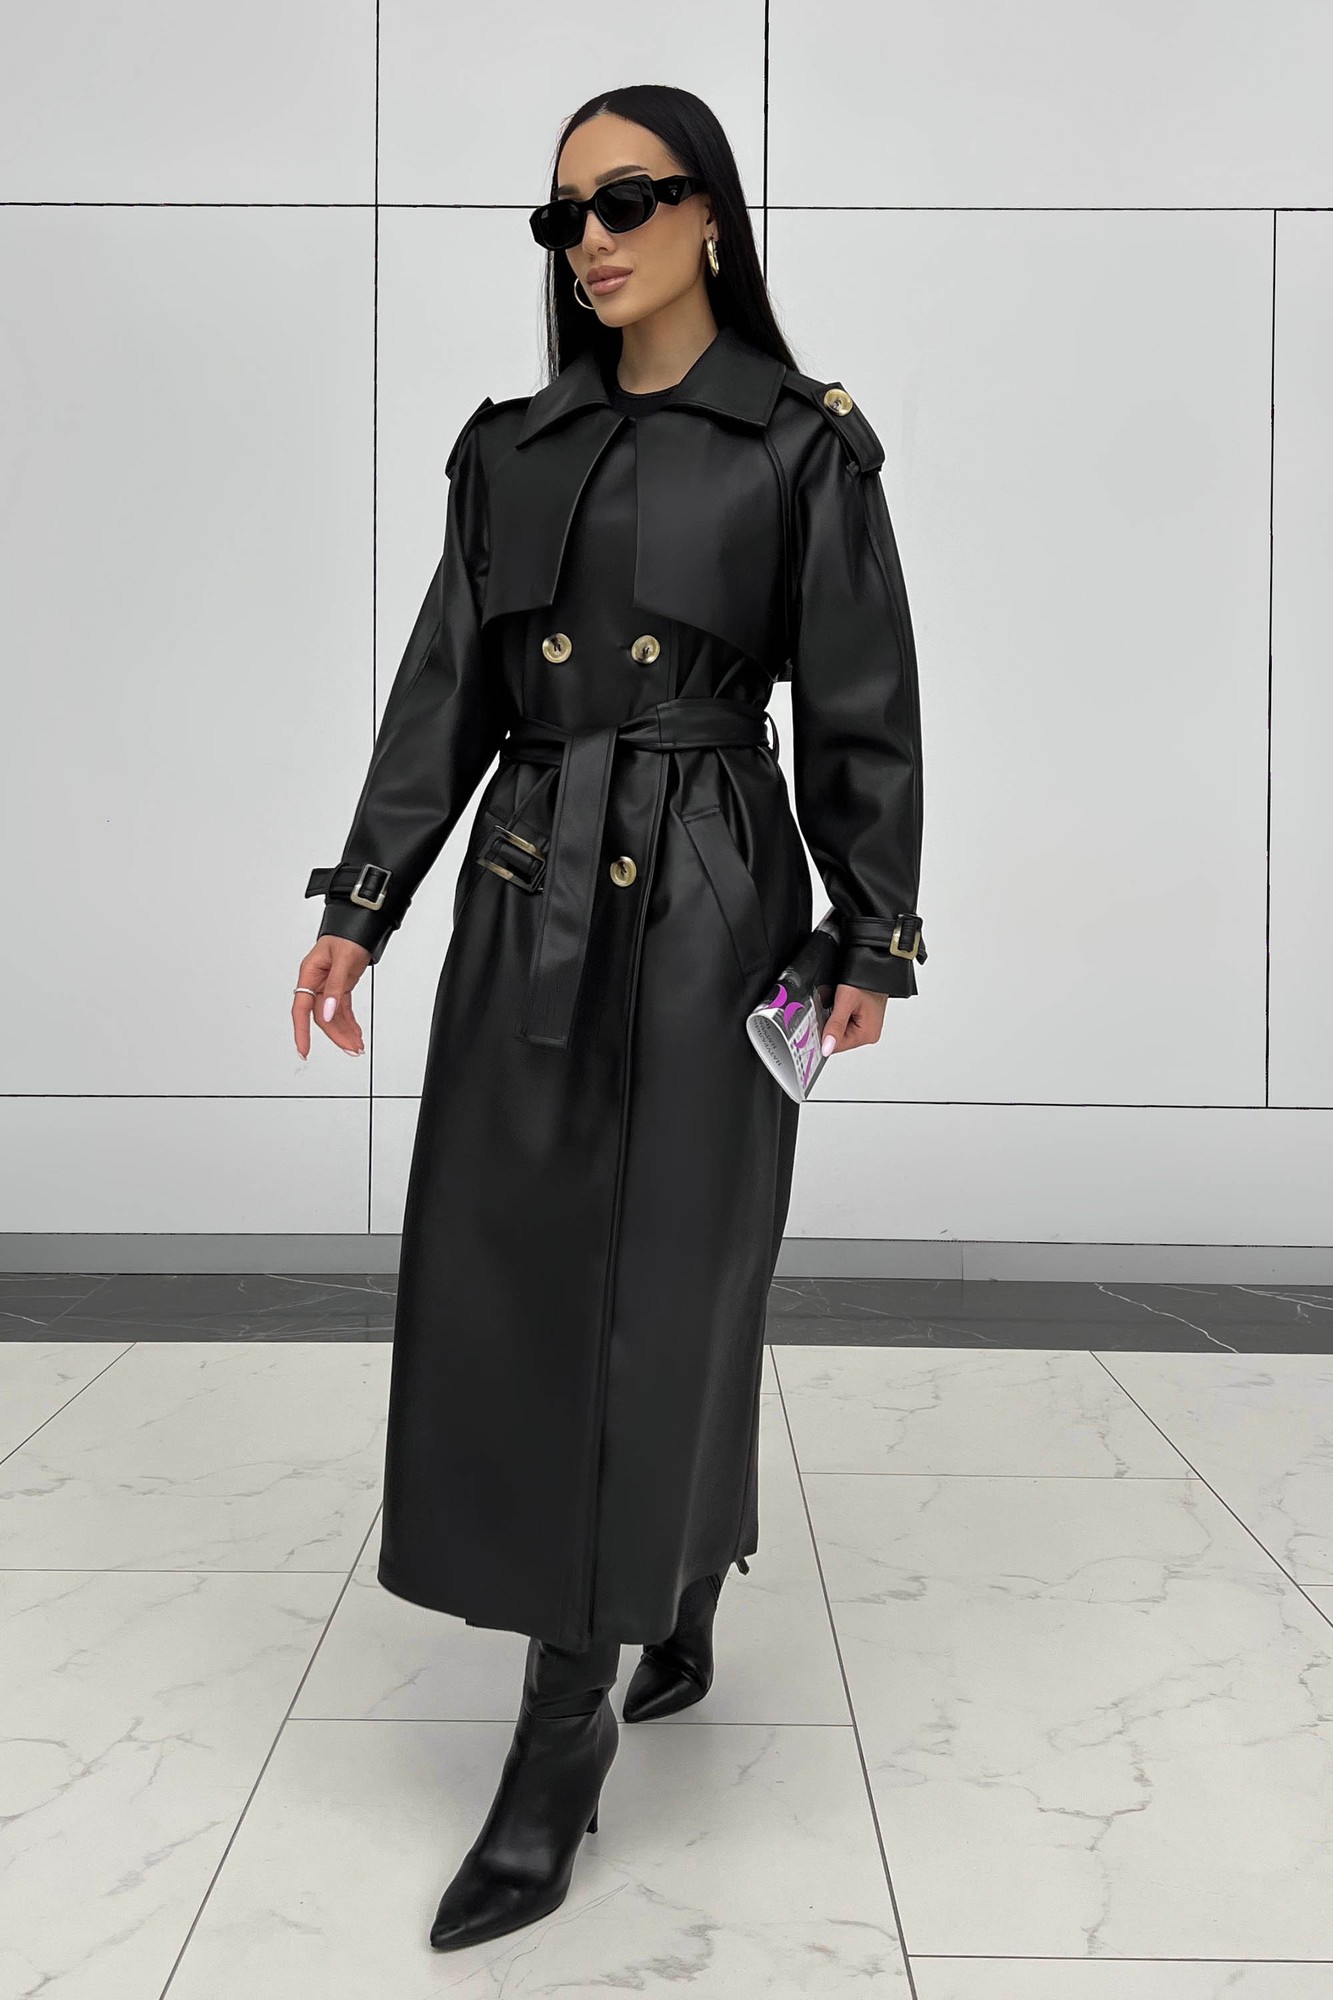 The Next trench coat is elongated in black